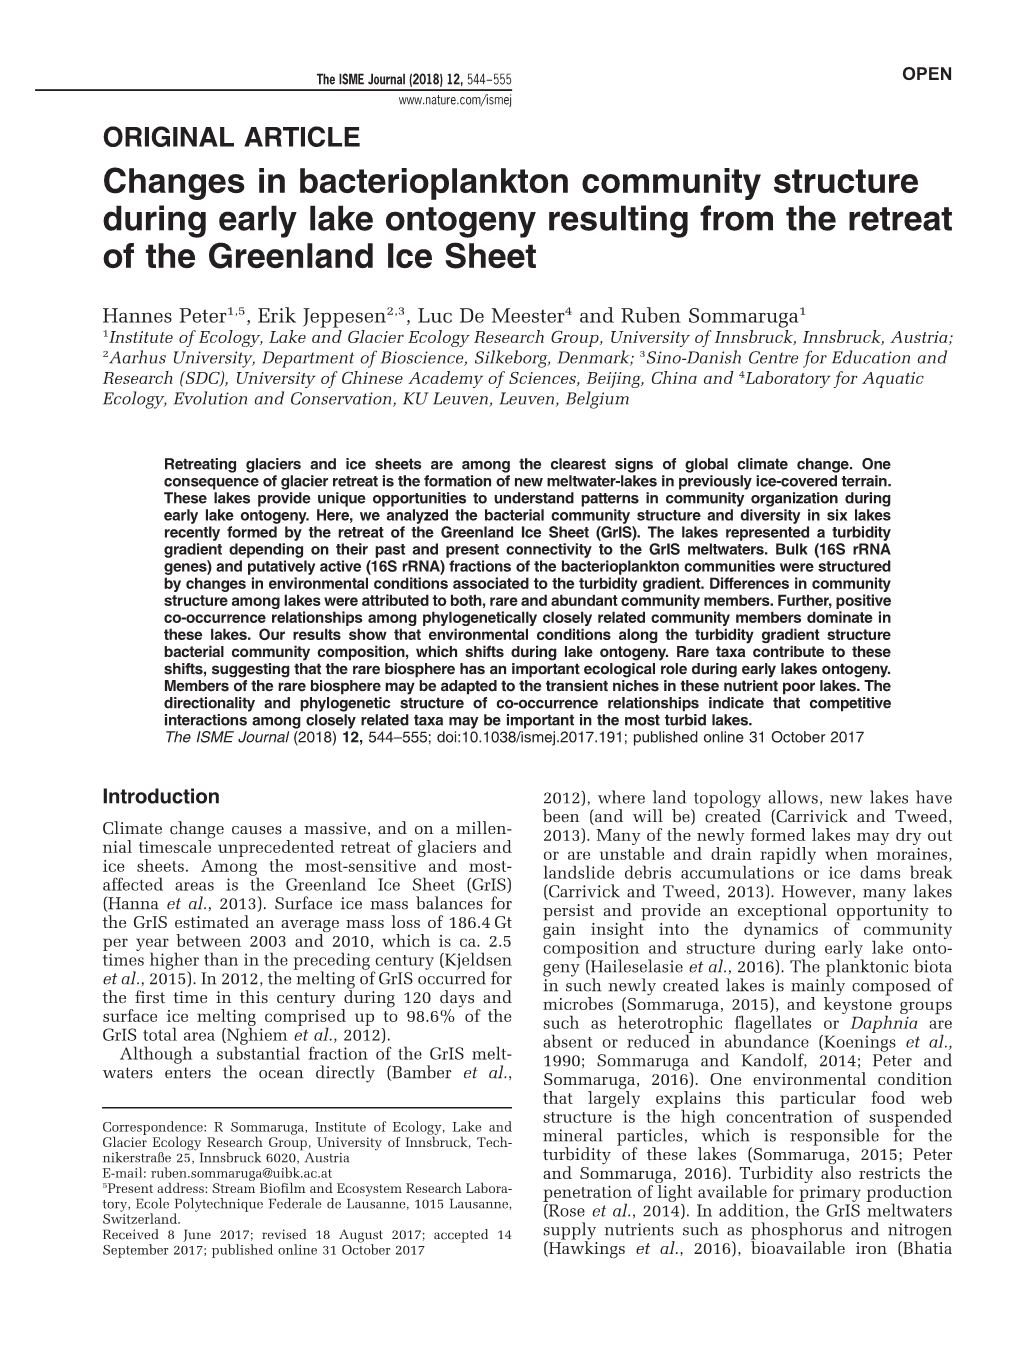 Changes in Bacterioplankton Community Structure During Early Lake Ontogeny Resulting from the Retreat of the Greenland Ice Sheet